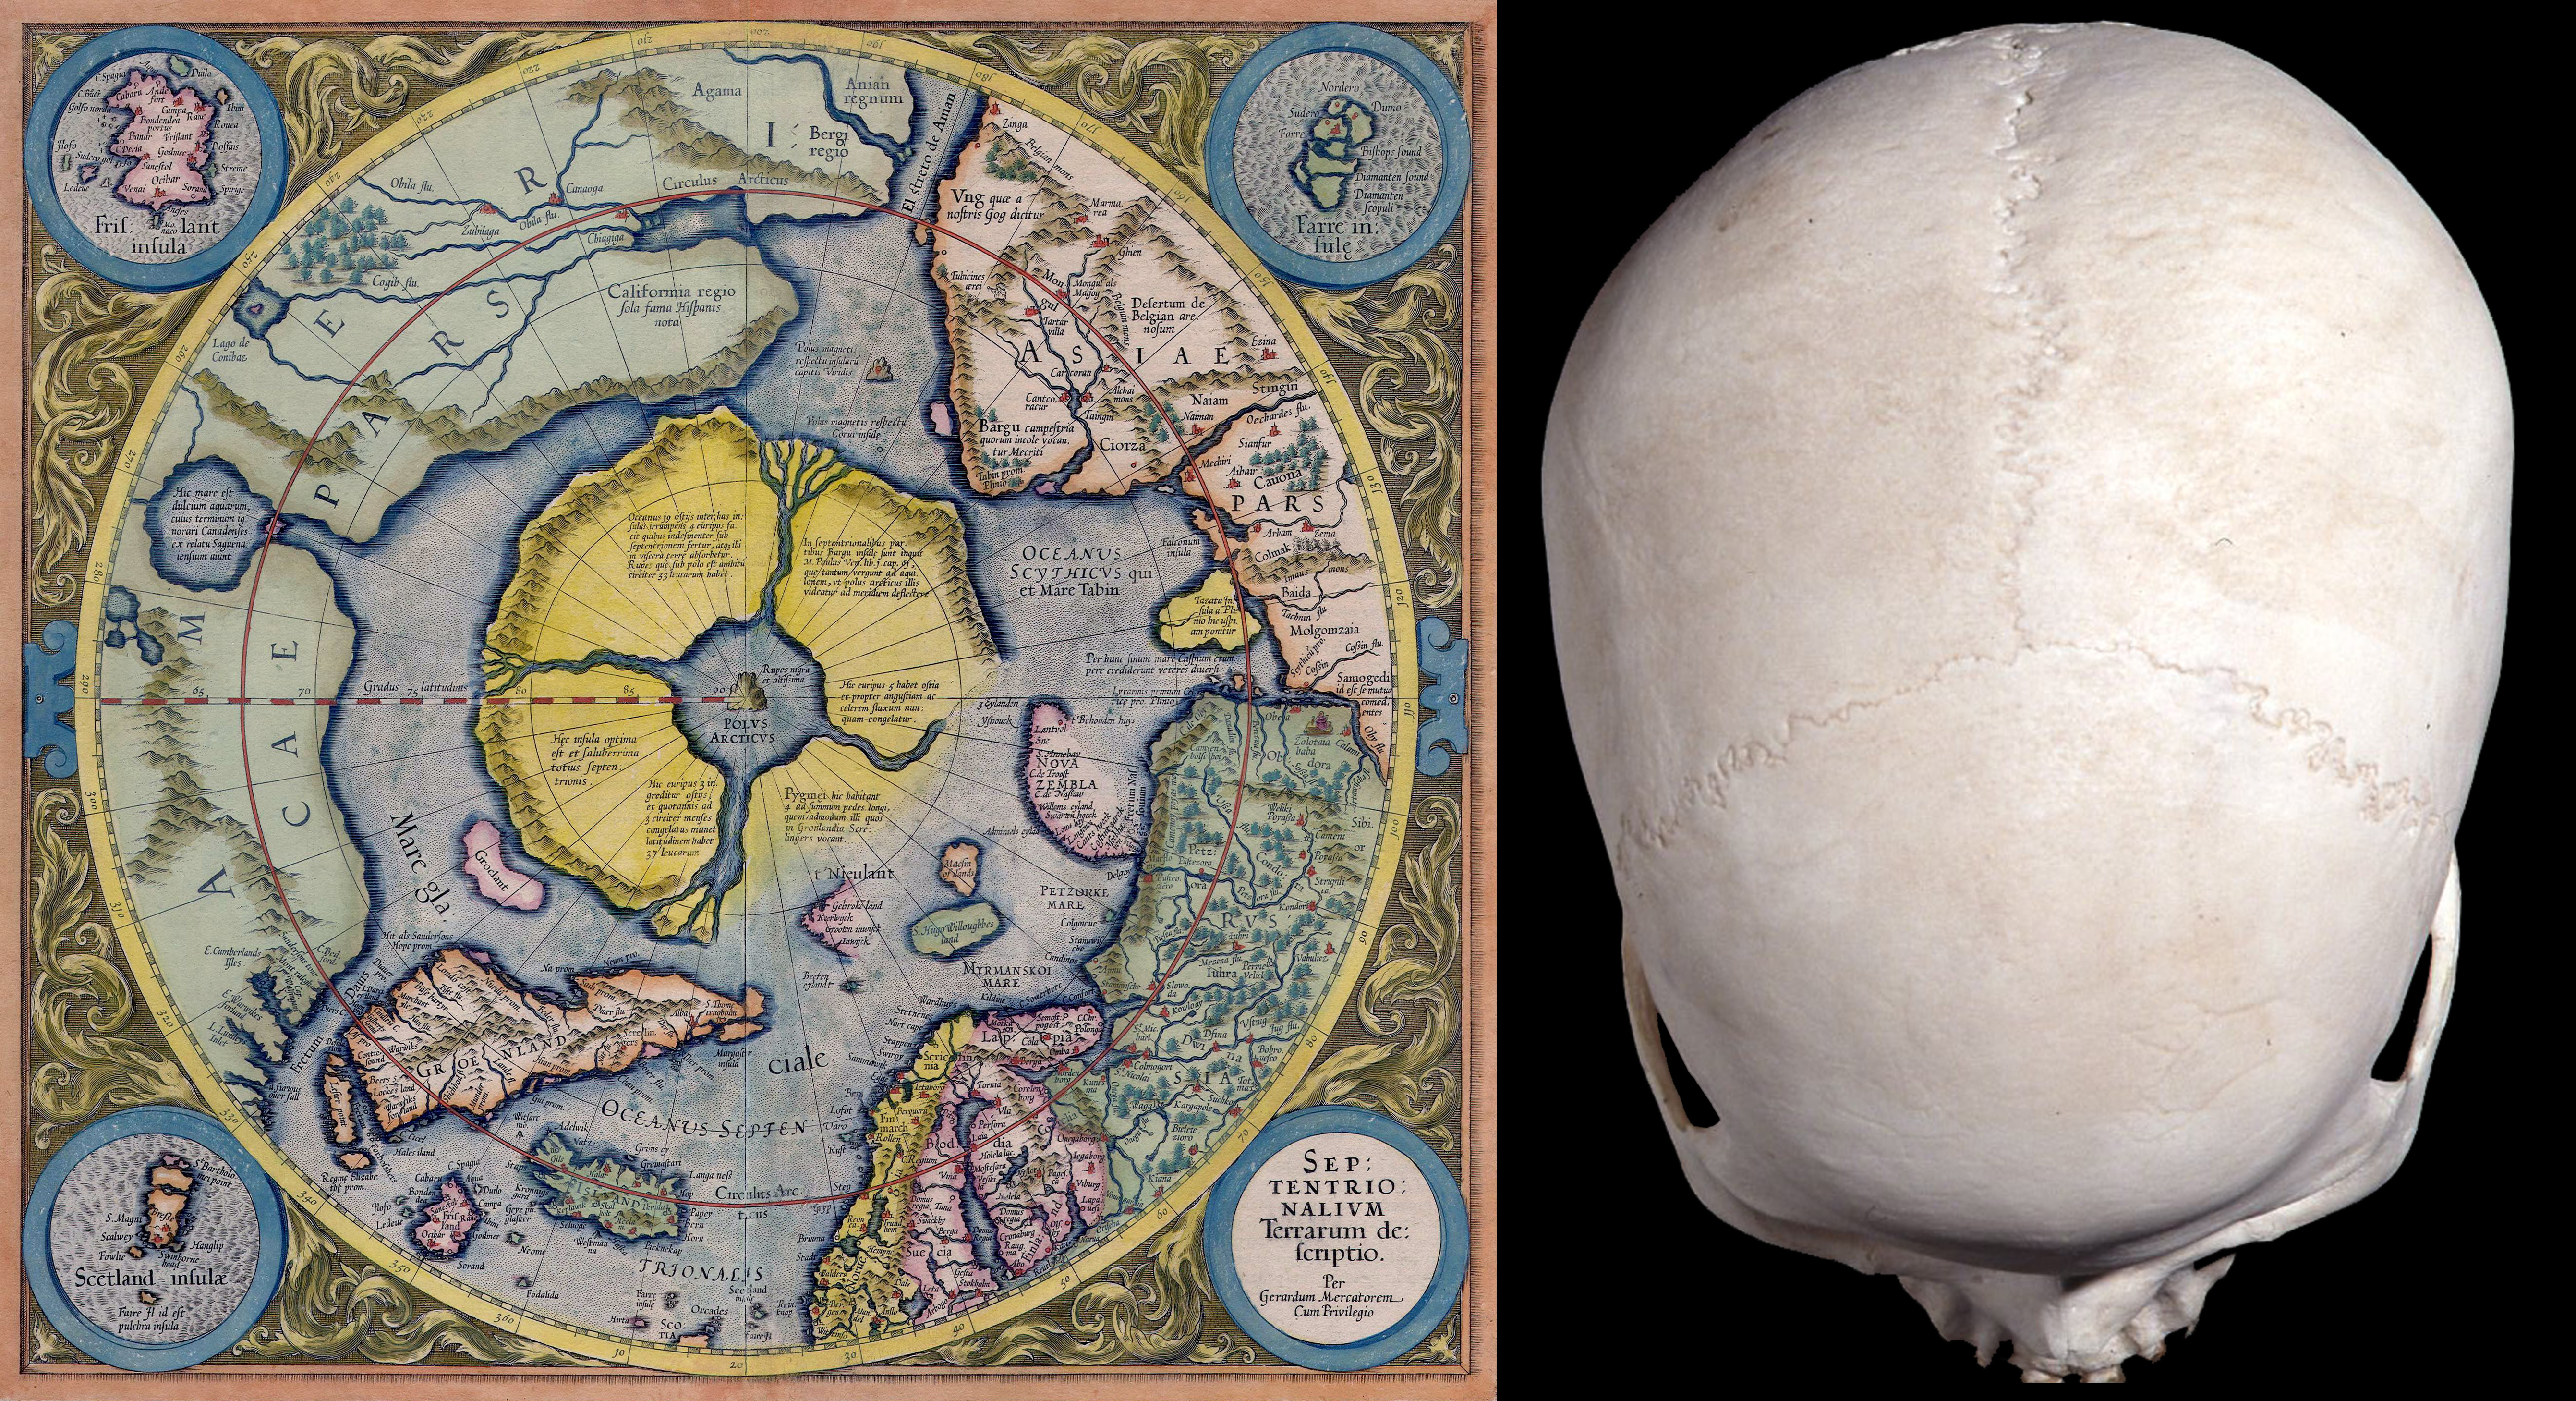 Hyperborea the place of the skull